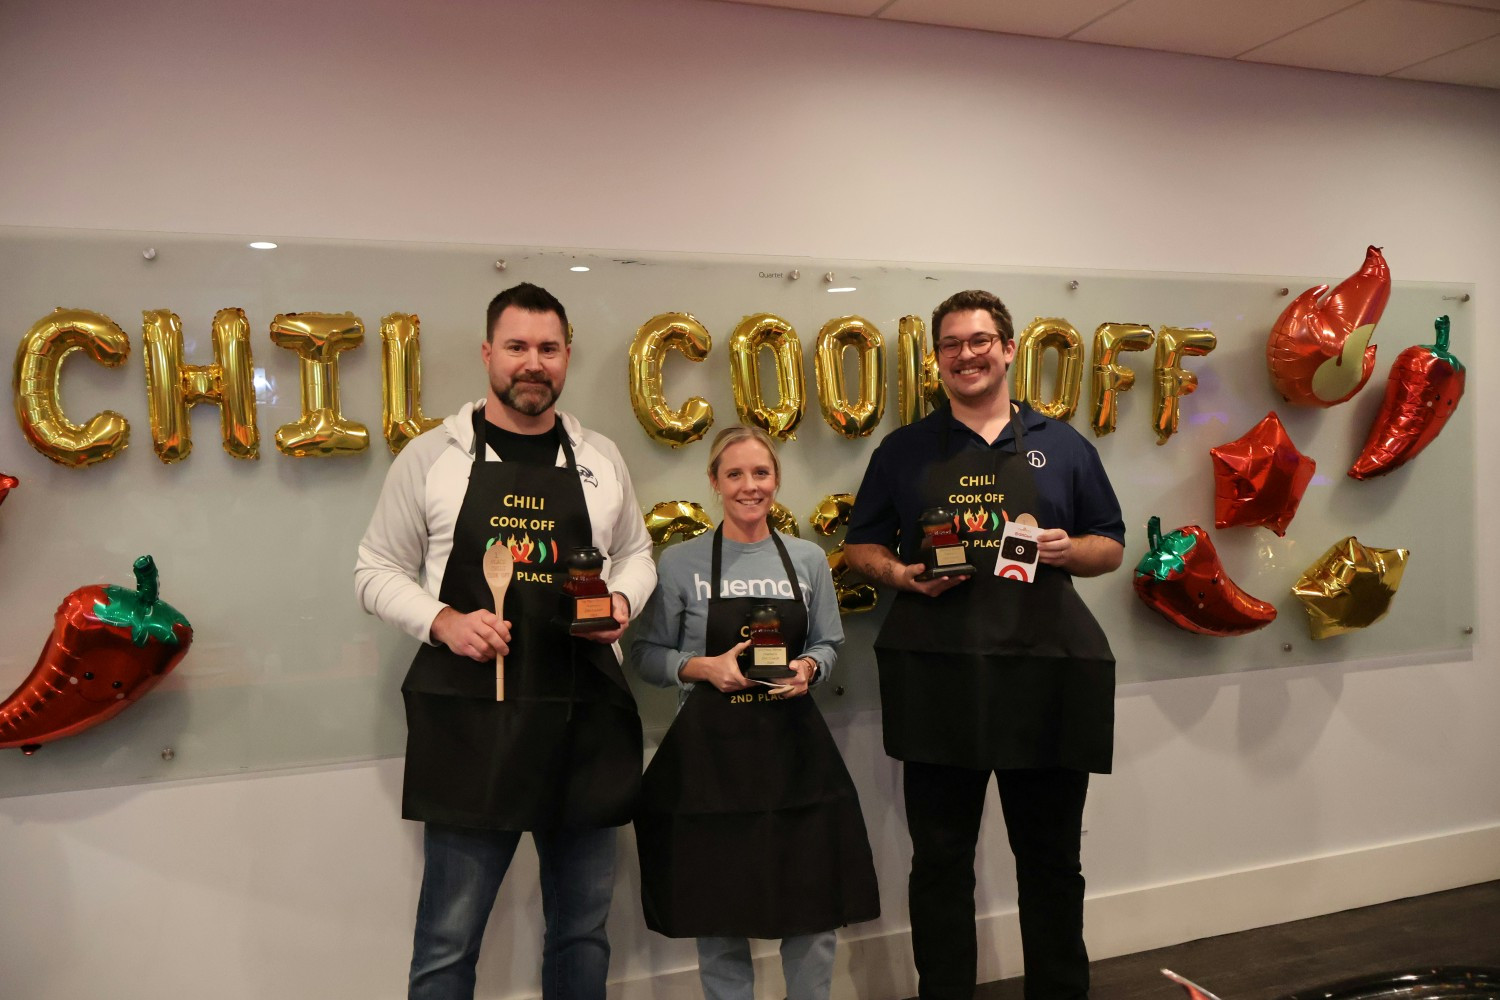 Annual Chili Cook-Off hosted each year prior to Super Bowl Sunday